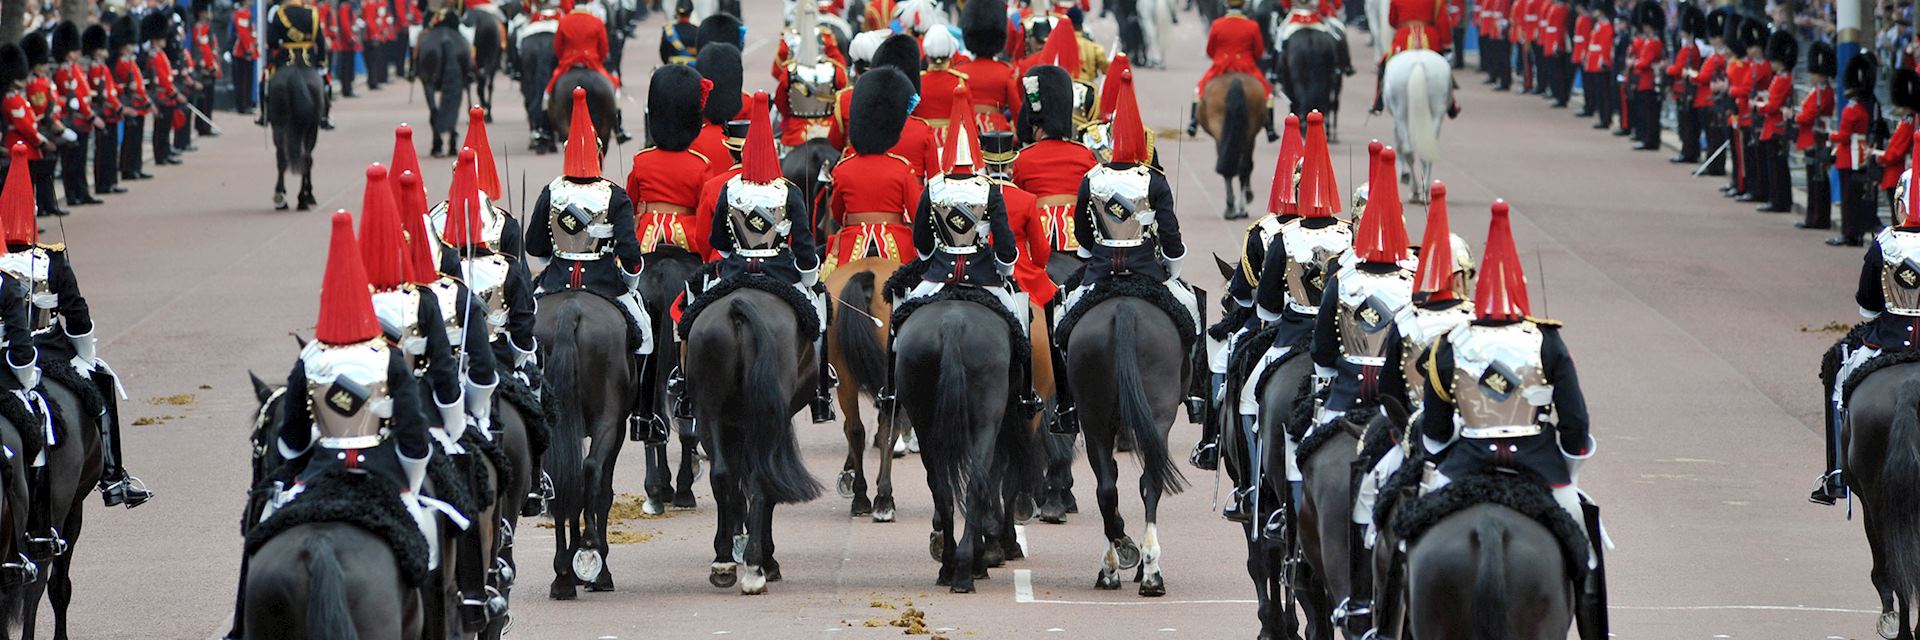 Horseguards on parade, London